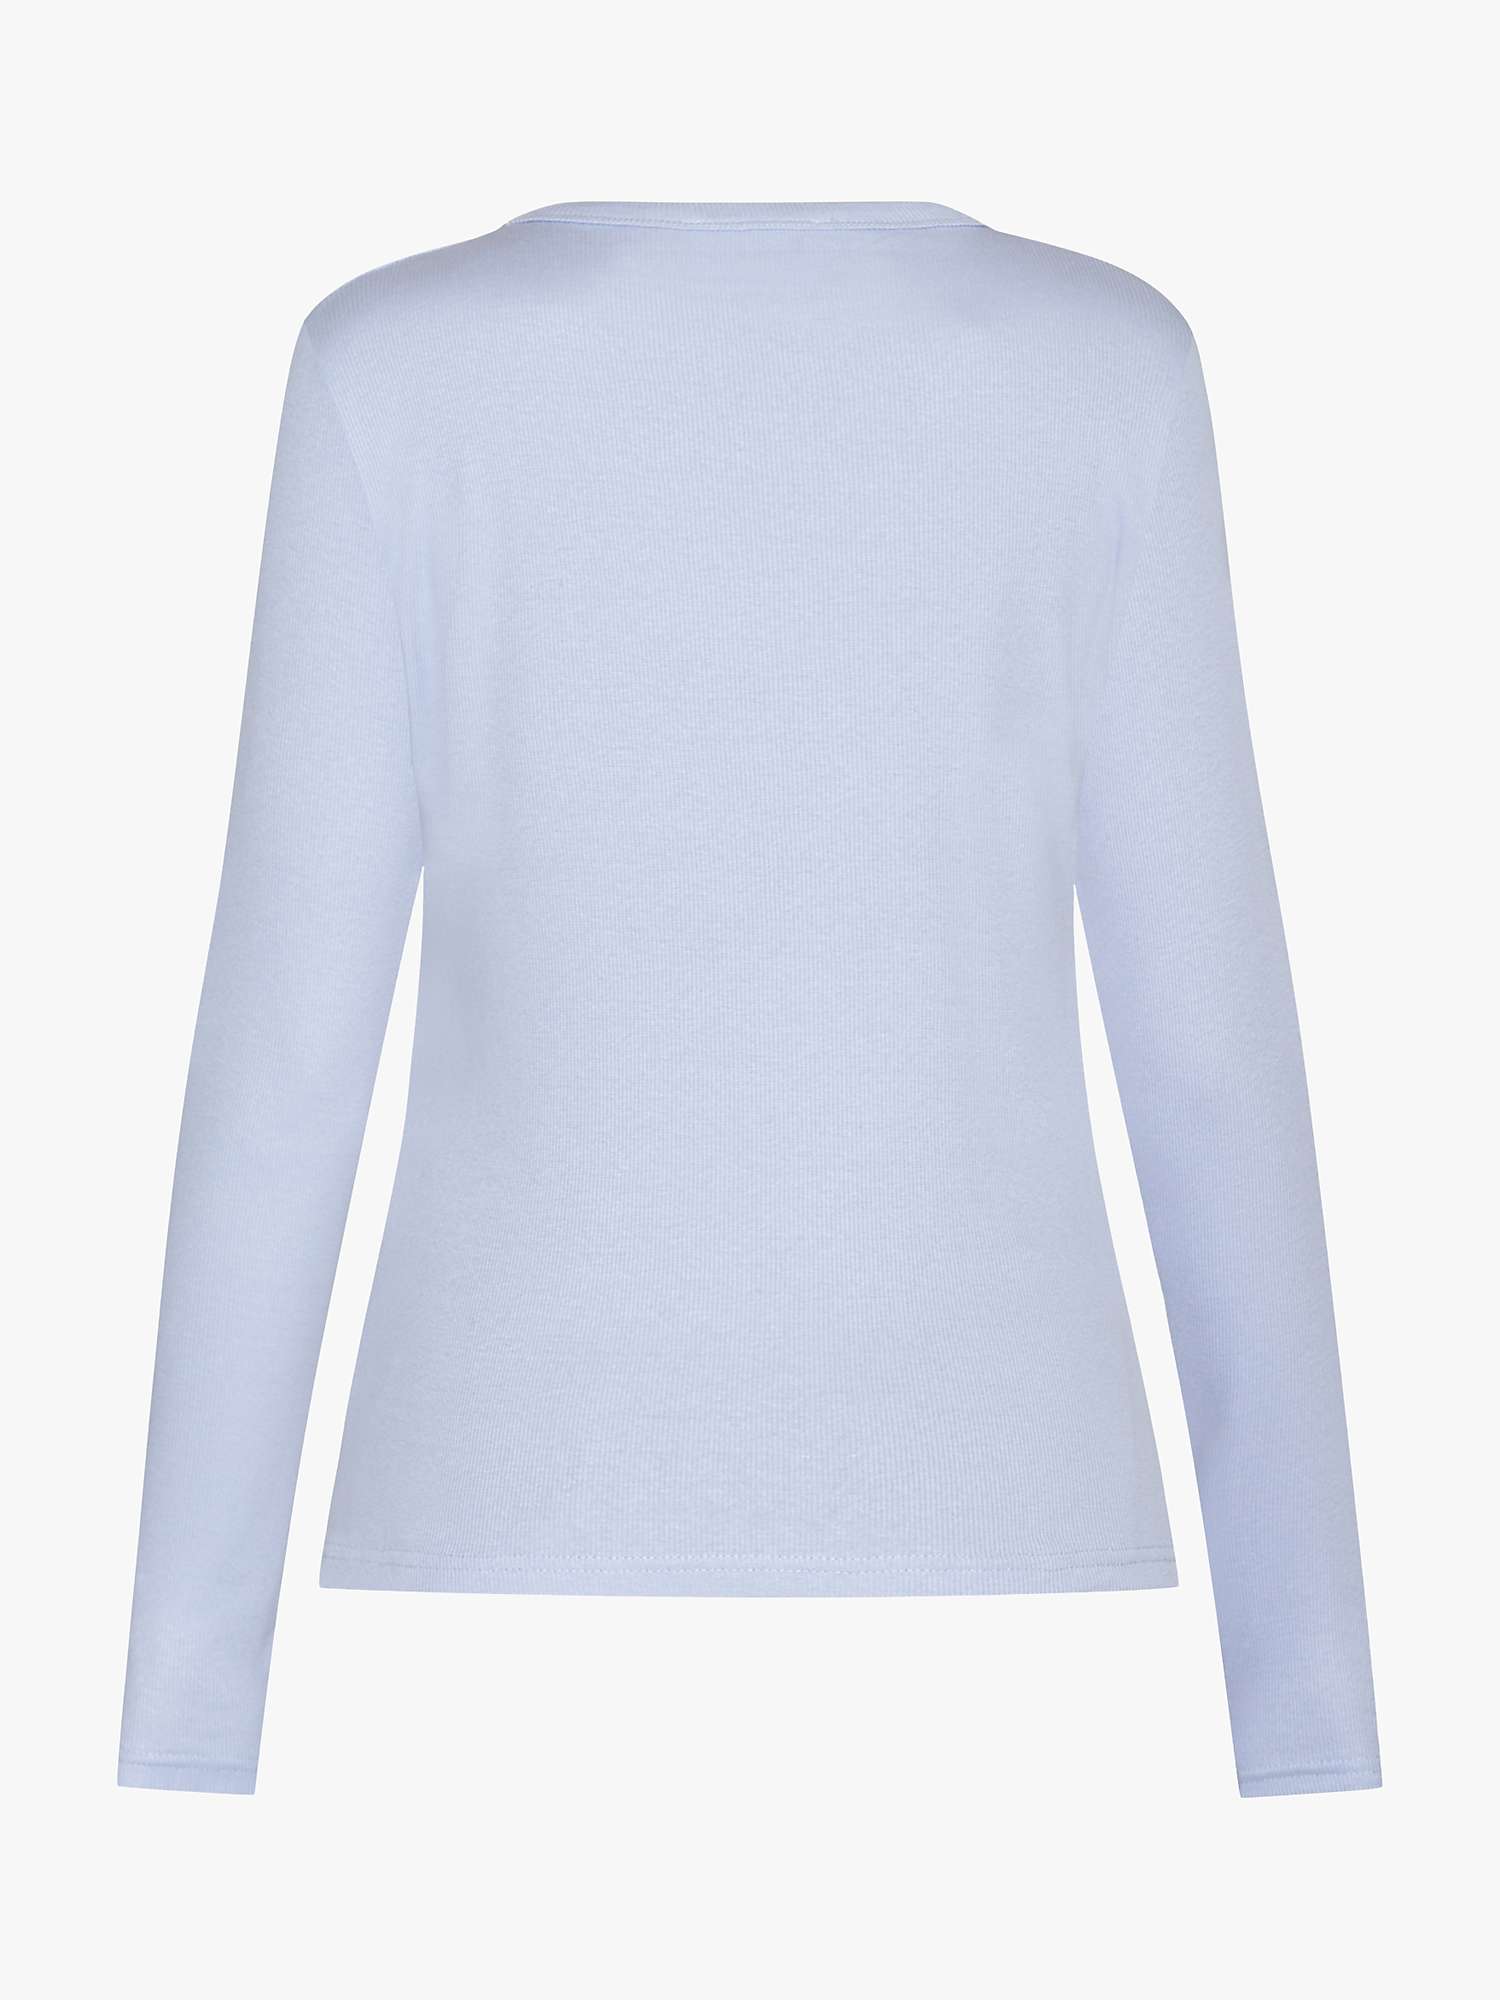 Buy Sisters Point Slim Fitted Rib Long Sleeve T-Shirt Online at johnlewis.com